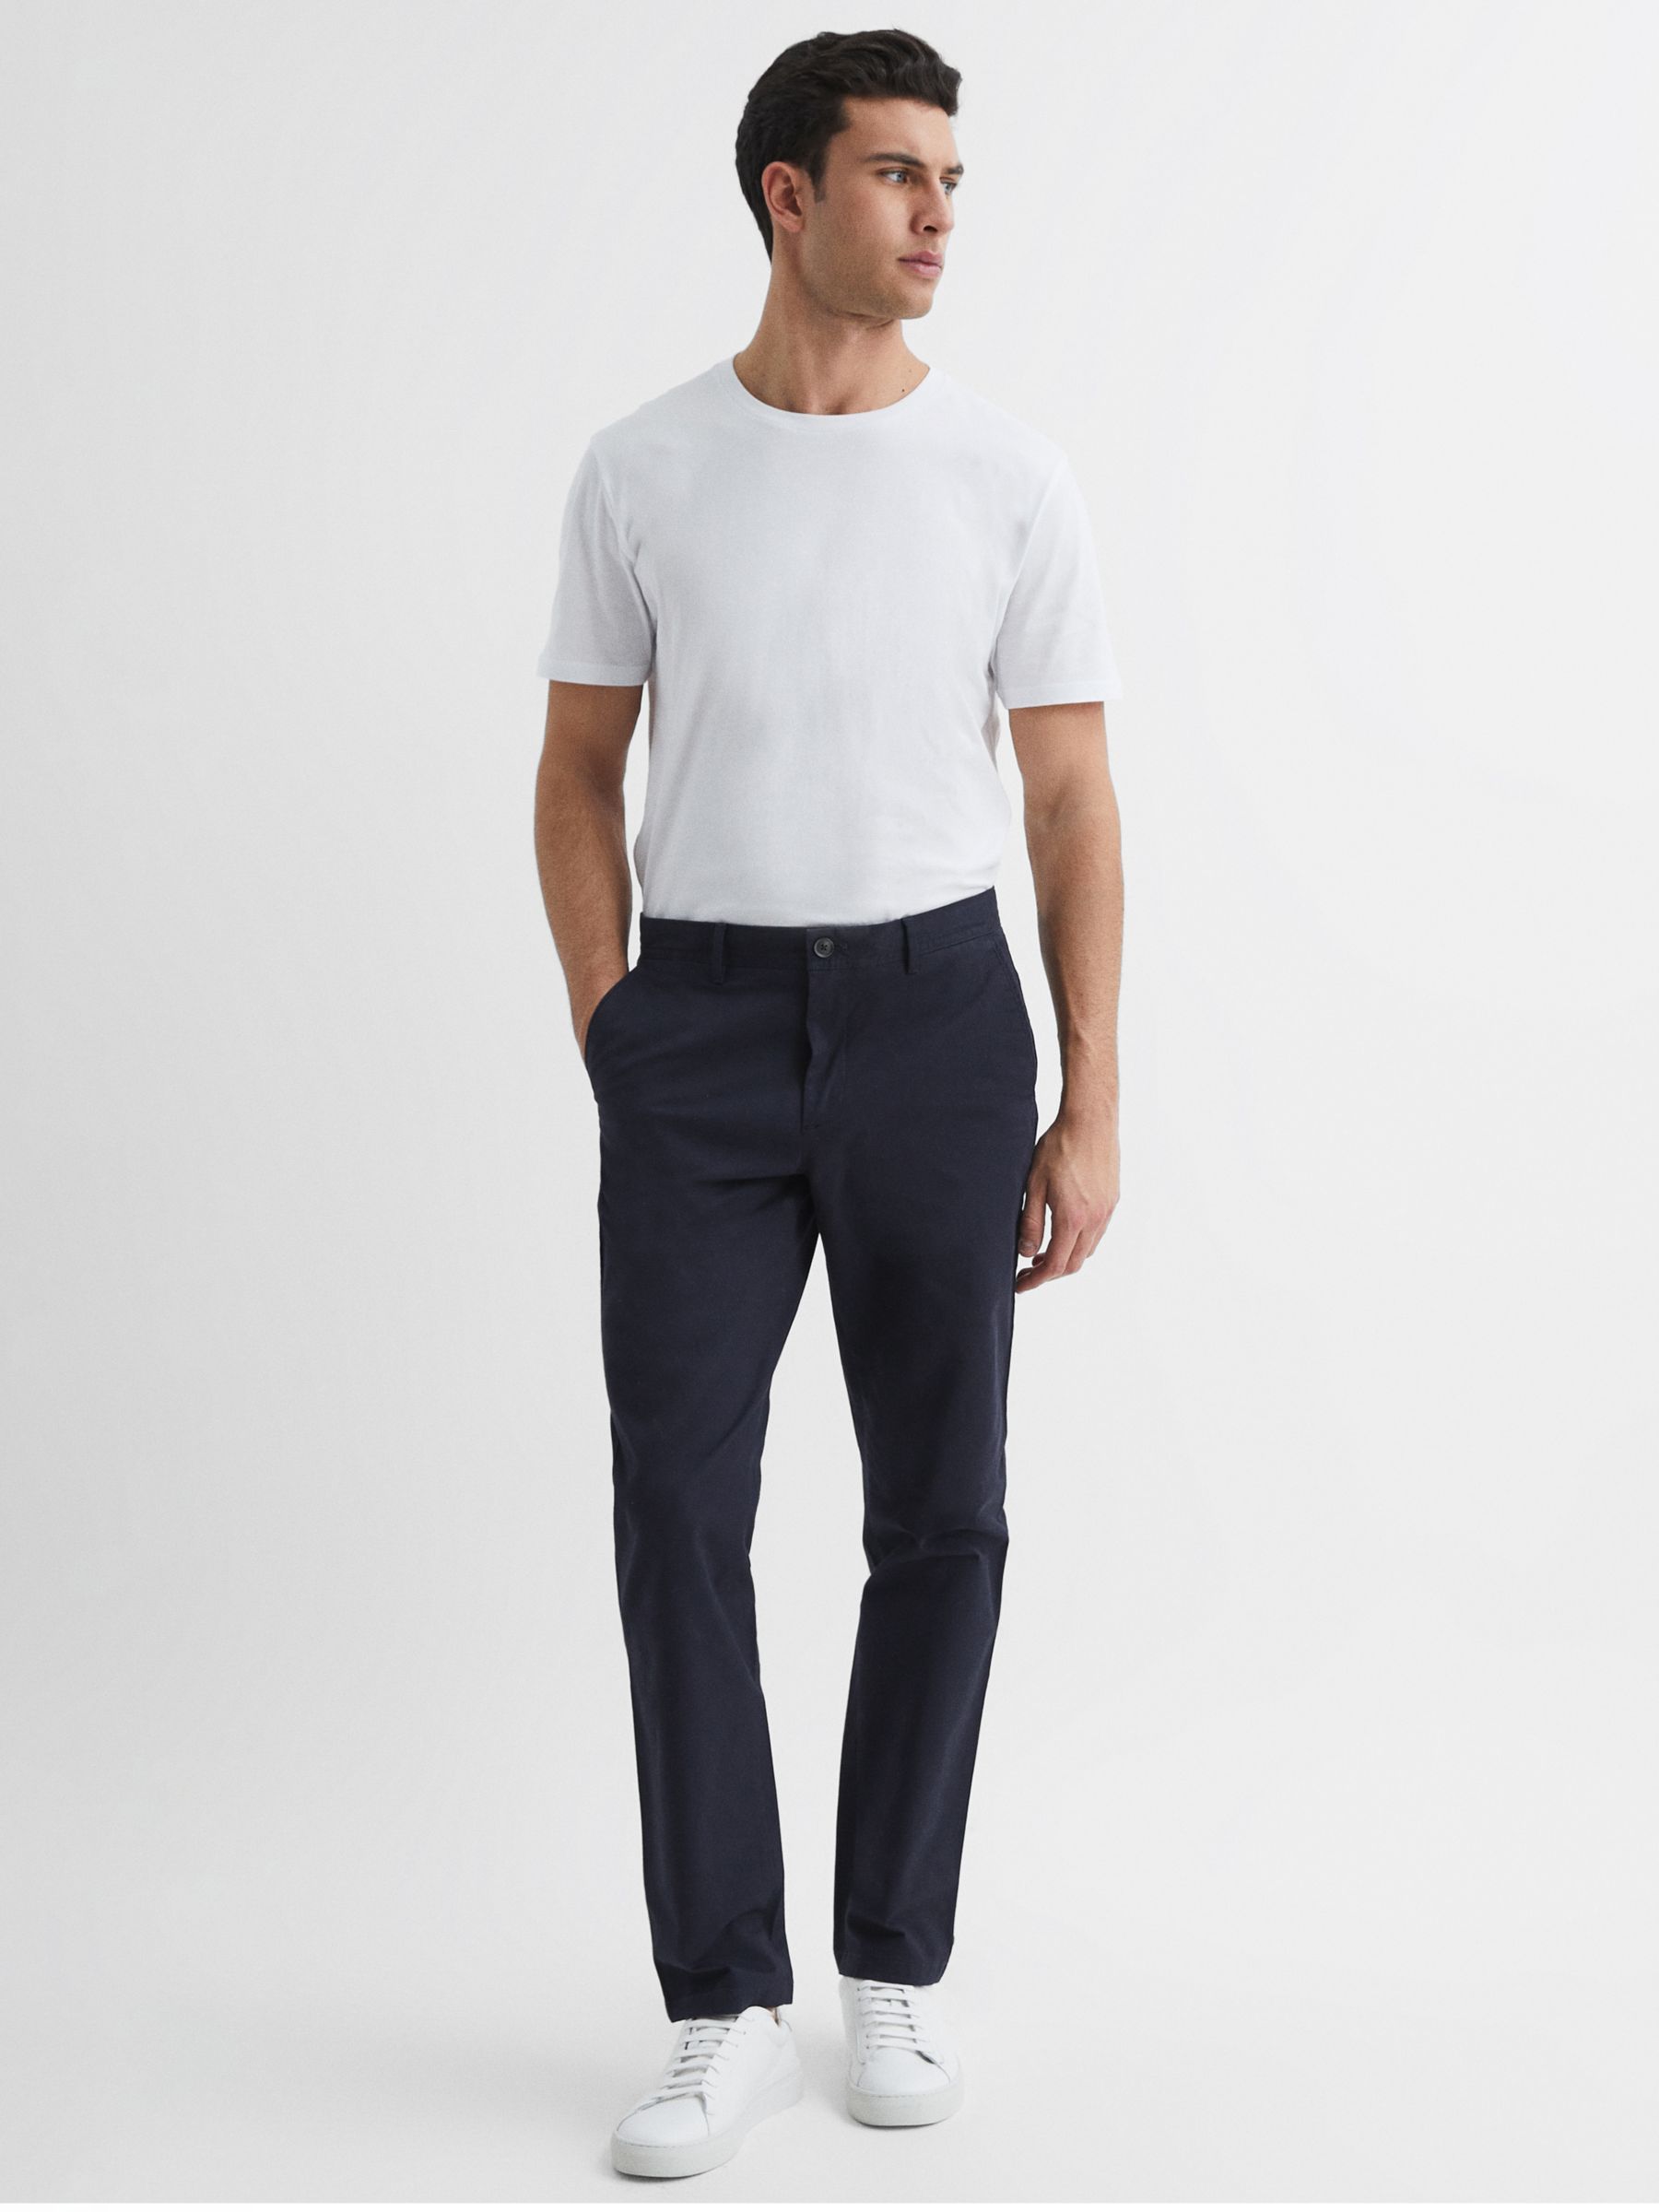 Reiss Pitch Slim Fit Stretch Cotton Chino Trousers, Navy at John Lewis ...